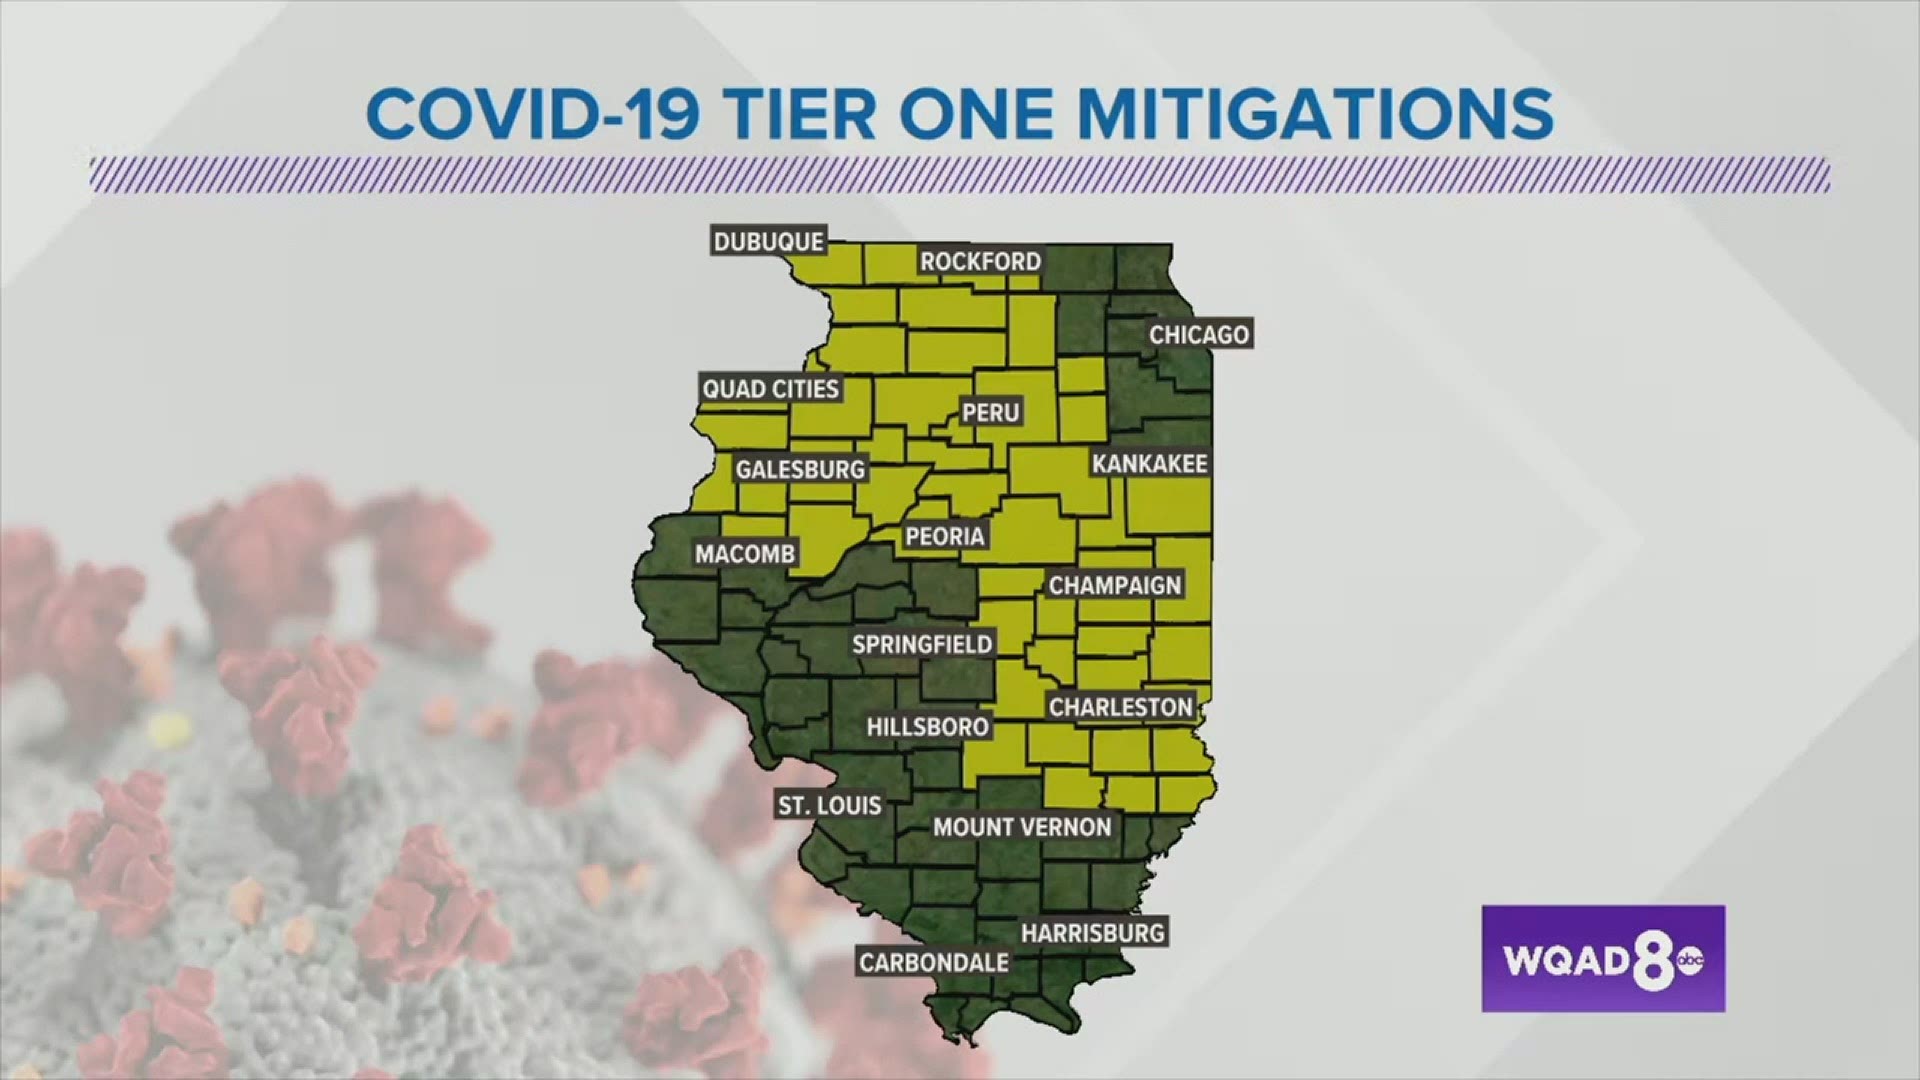 The Quad Cities area moved from Tier 2 COVID-19 mitigations to Tier 1 over the weekend.